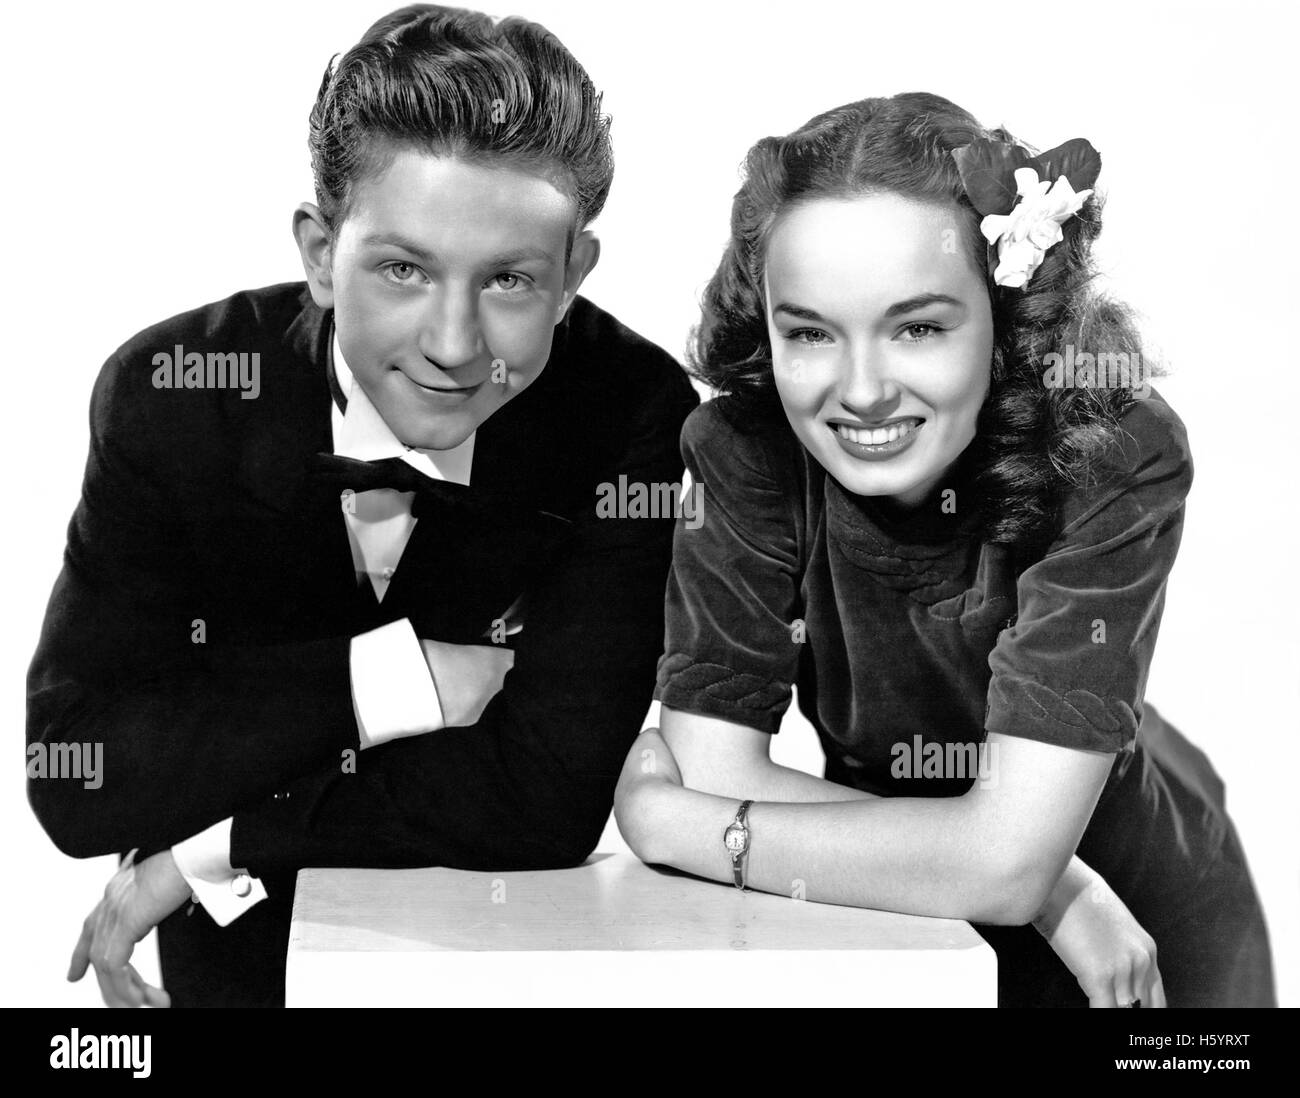 CHIP OFF THE OLD BLOCK 1944 Universal Pictures Film mit Ann Blyth und Donald O'Connor Stockfoto